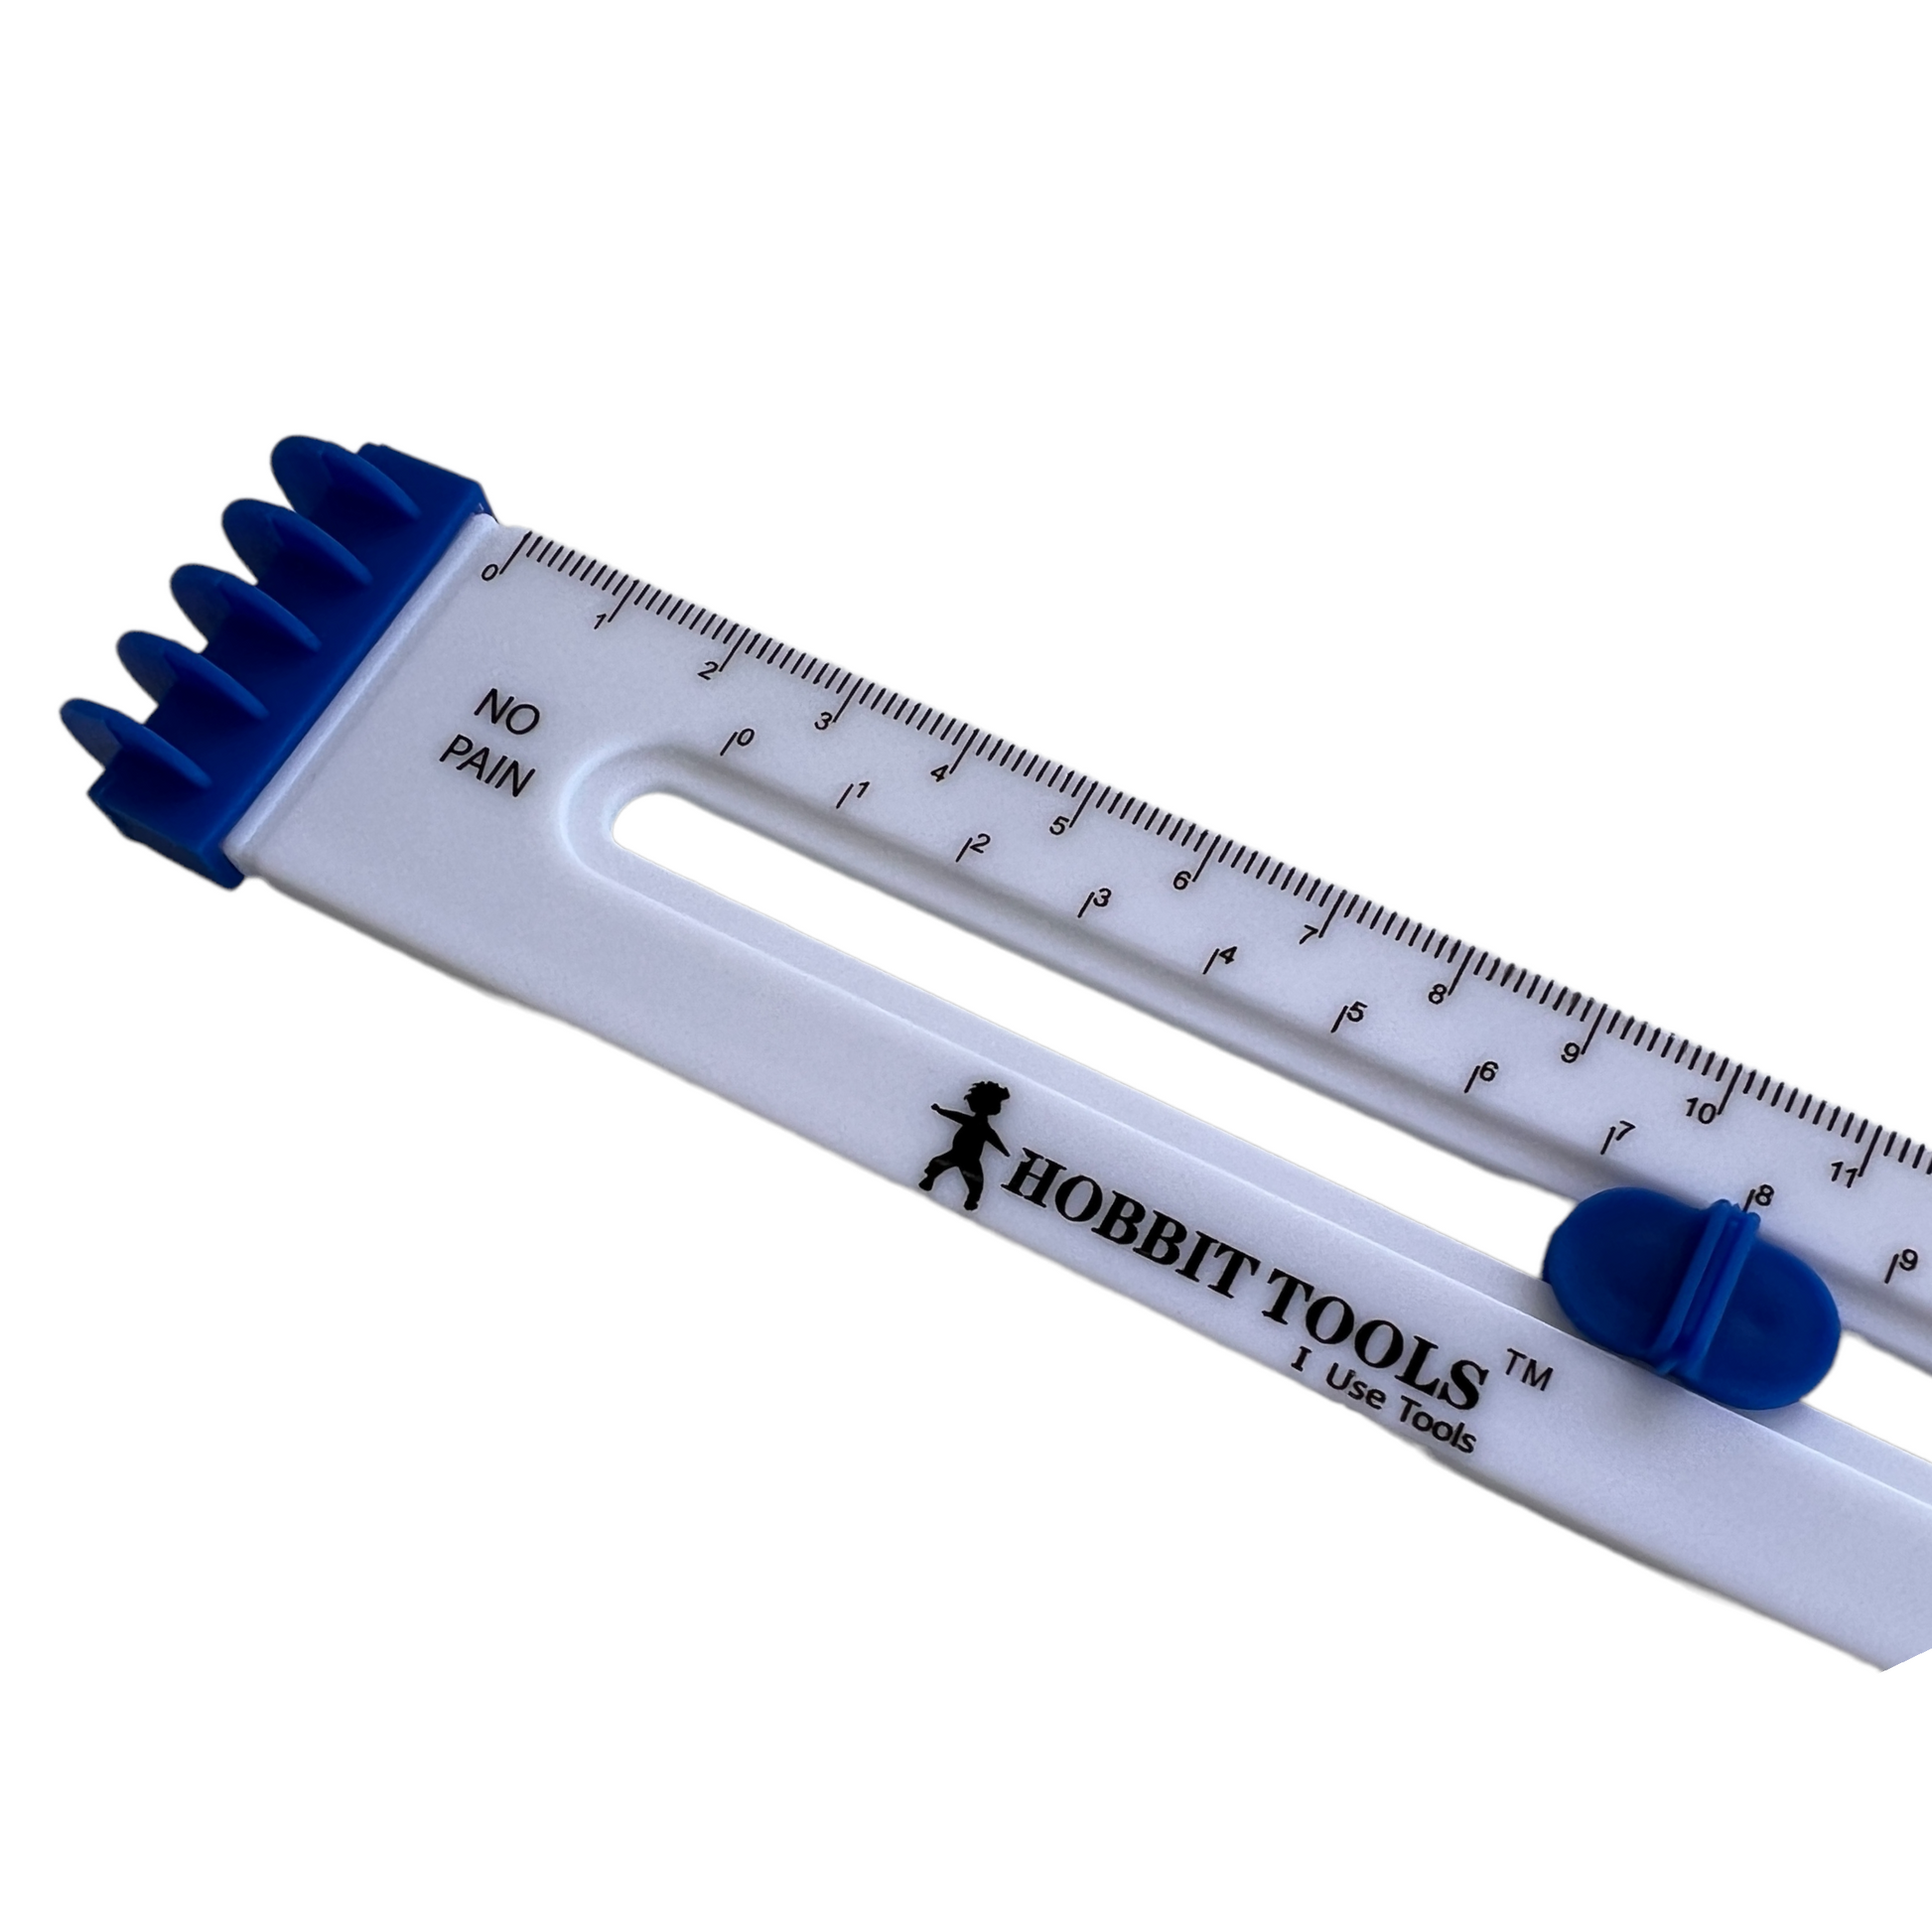 Pain Scale Ruler First Aid SPIRIT SPARKPLUGS   